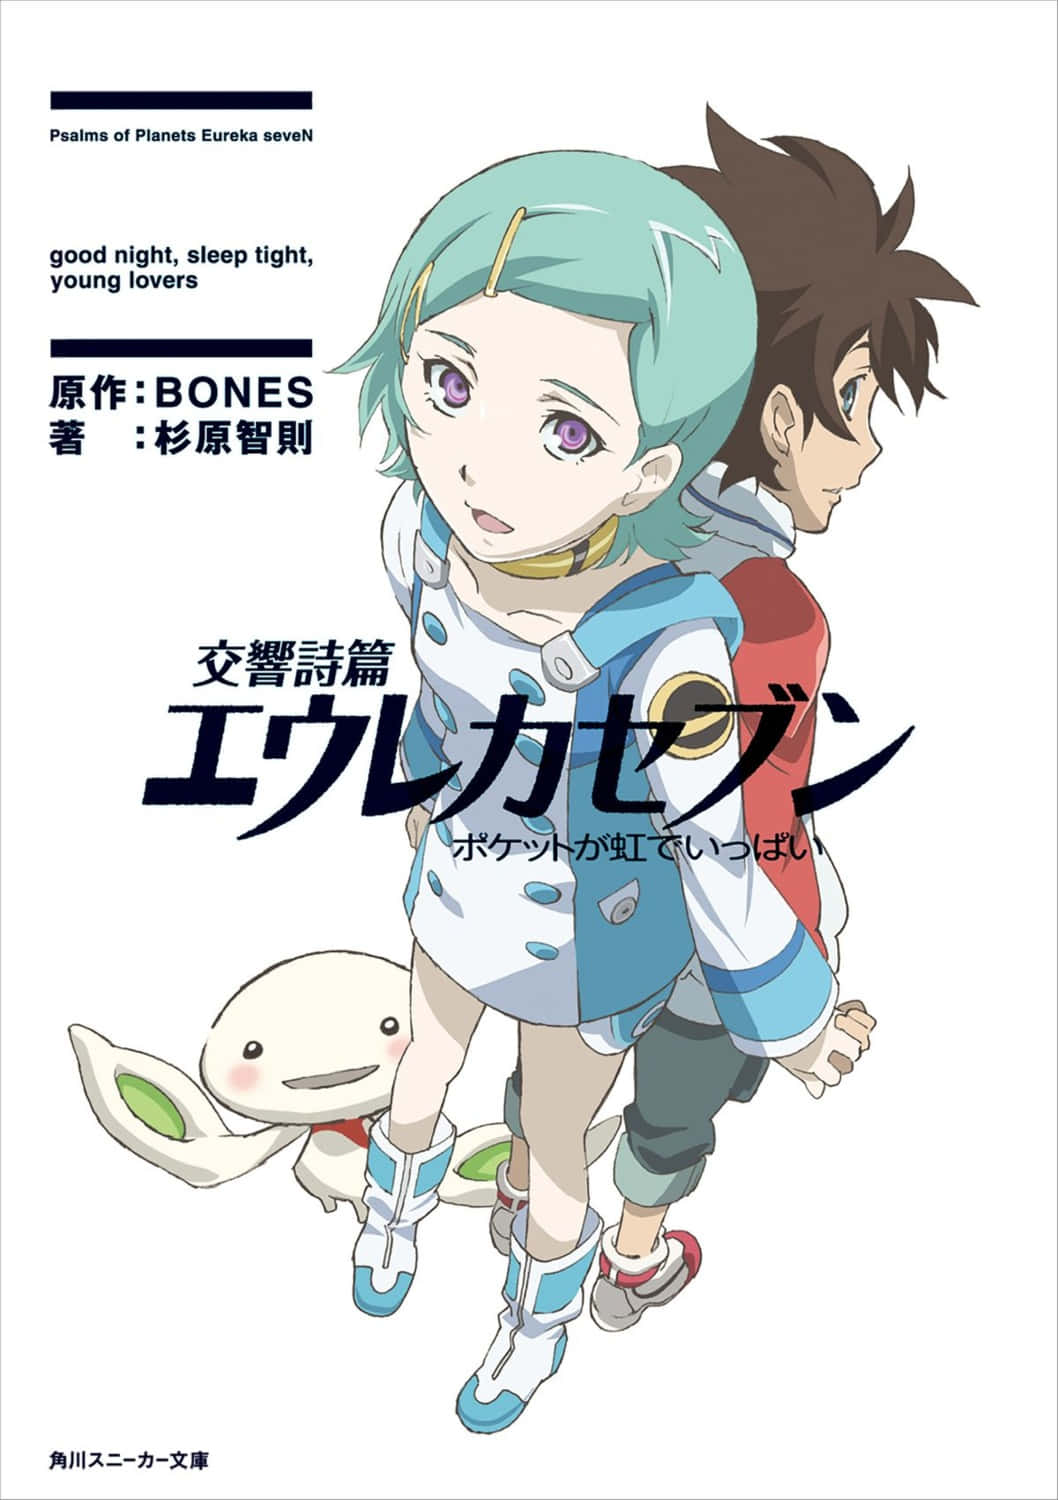 Get ready to take to the skies with Eureka Seven!